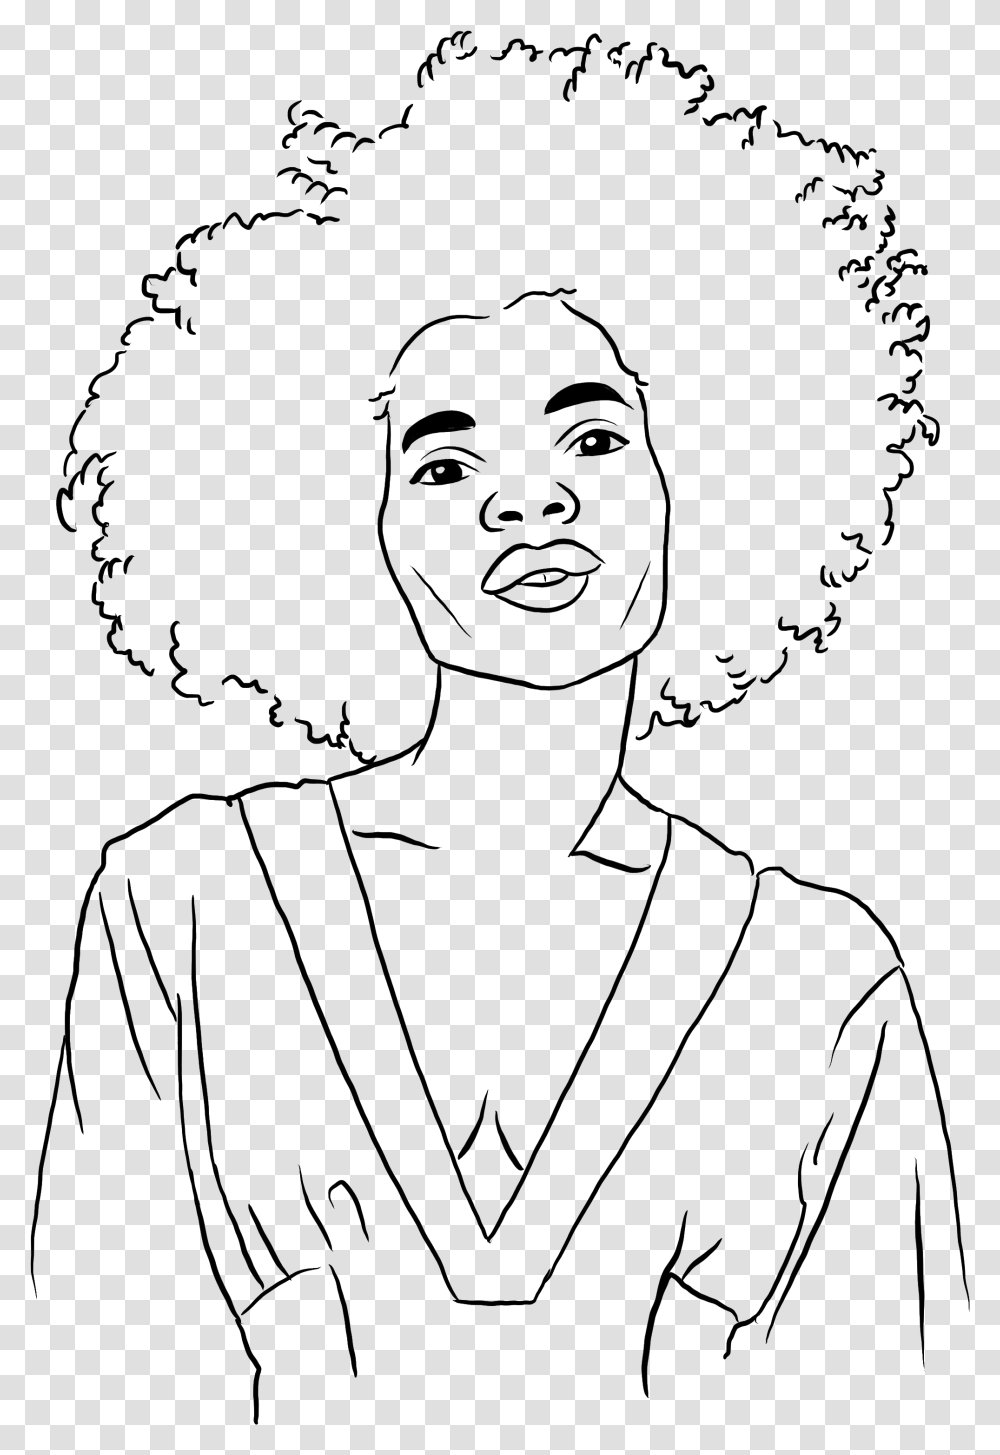 Illustration Of A Woman With Curly Hair Curly Hair Line Art, Face, Person, Silhouette, Portrait Transparent Png